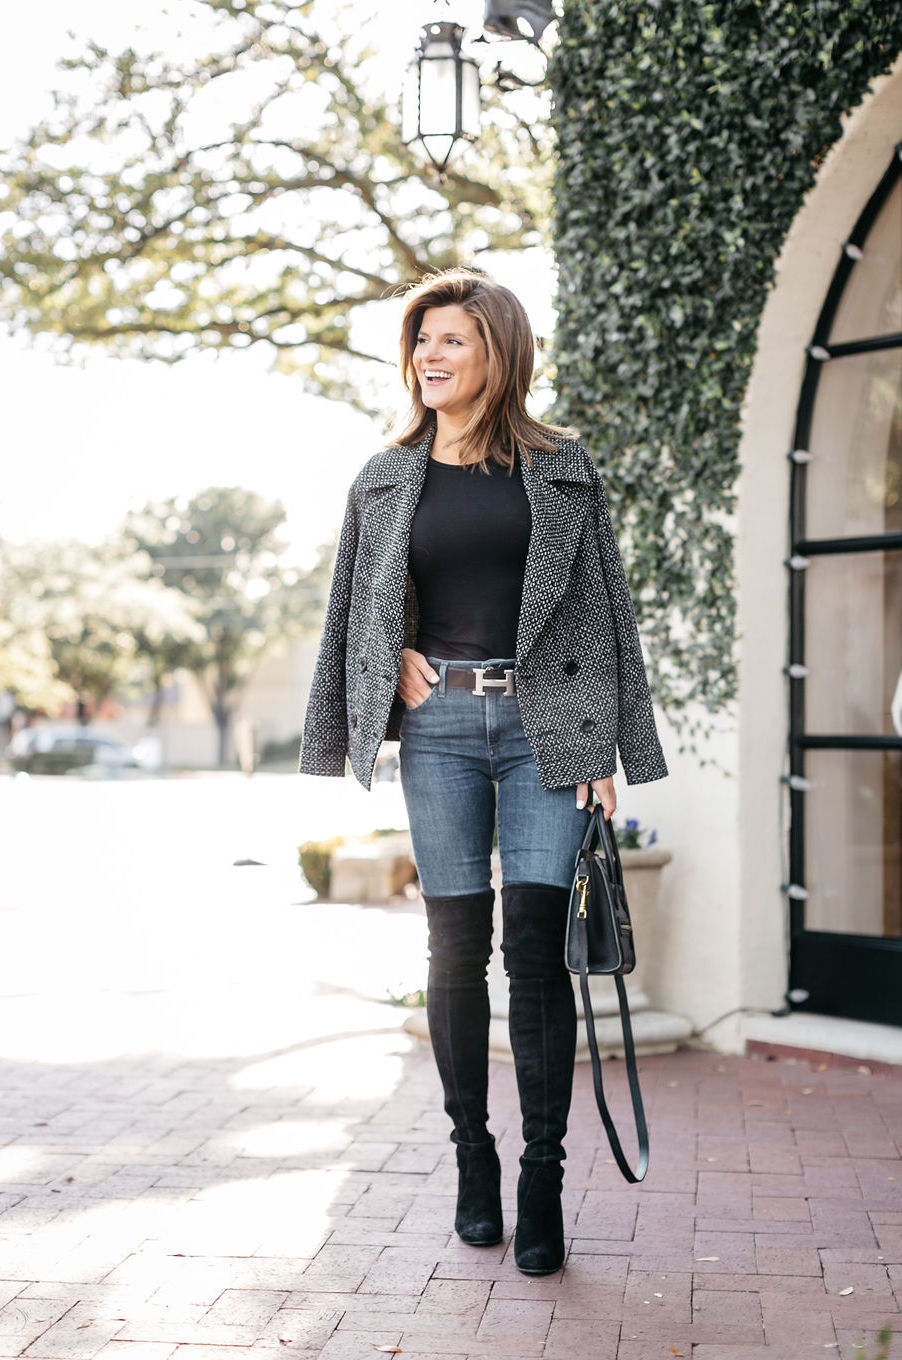 Over the Knee Boot Outfit Ideas - Straight A Style